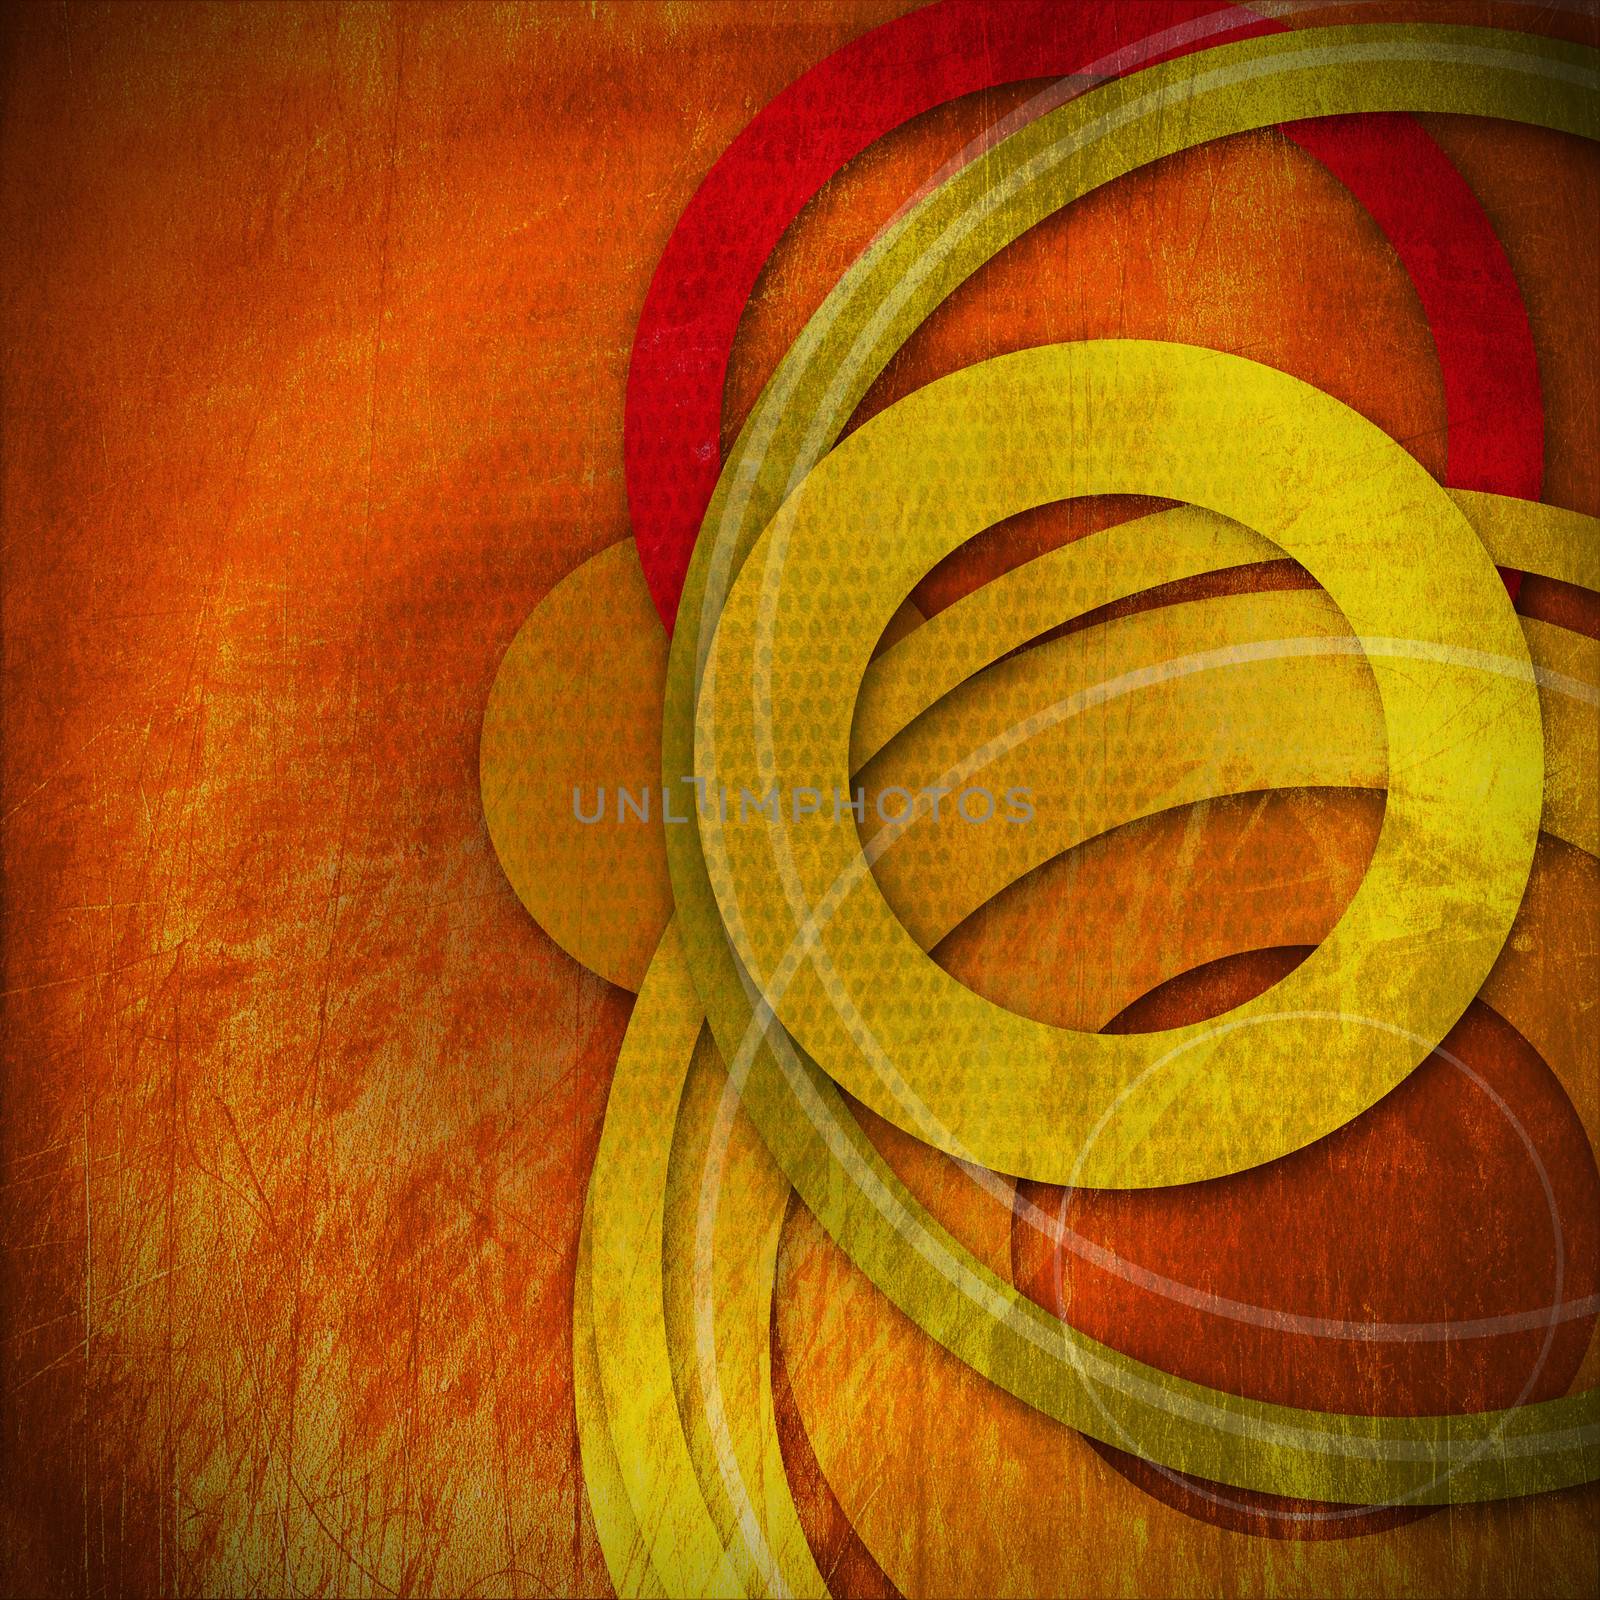 Grunge background with warm colors and geometric shapes of circles